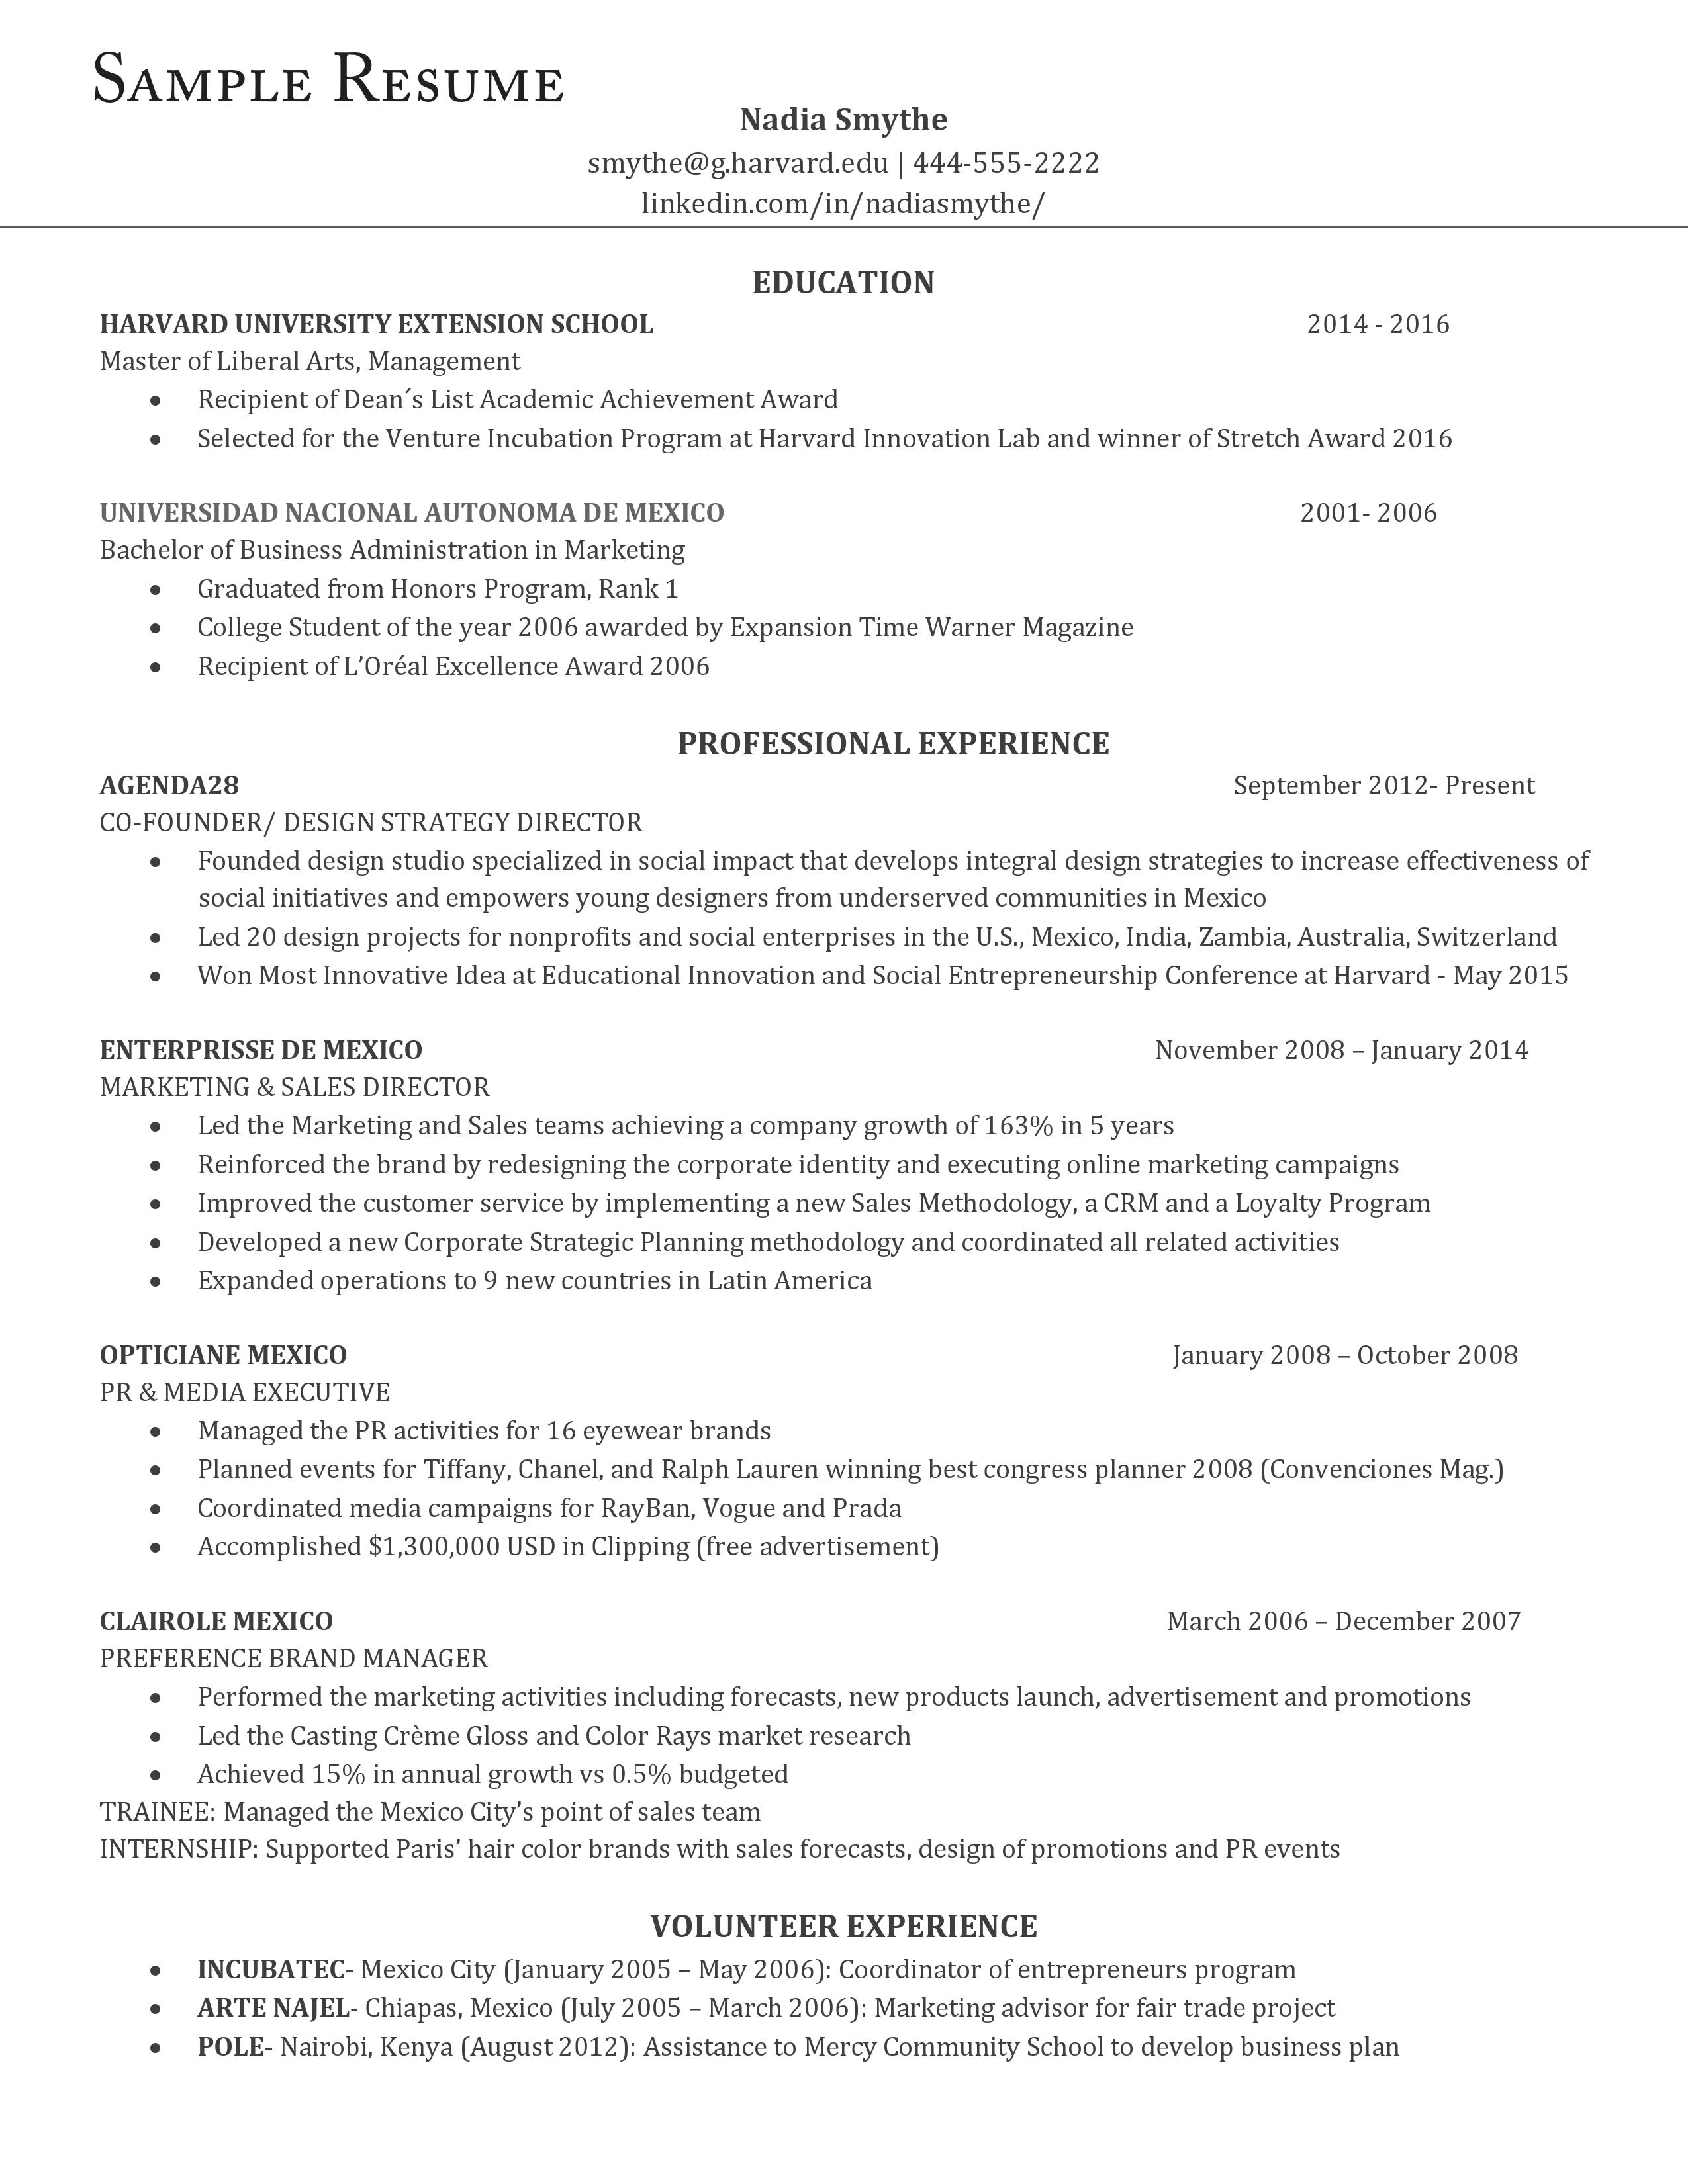 Cover Letter Sample Harvard from fm-static.cnbc.com